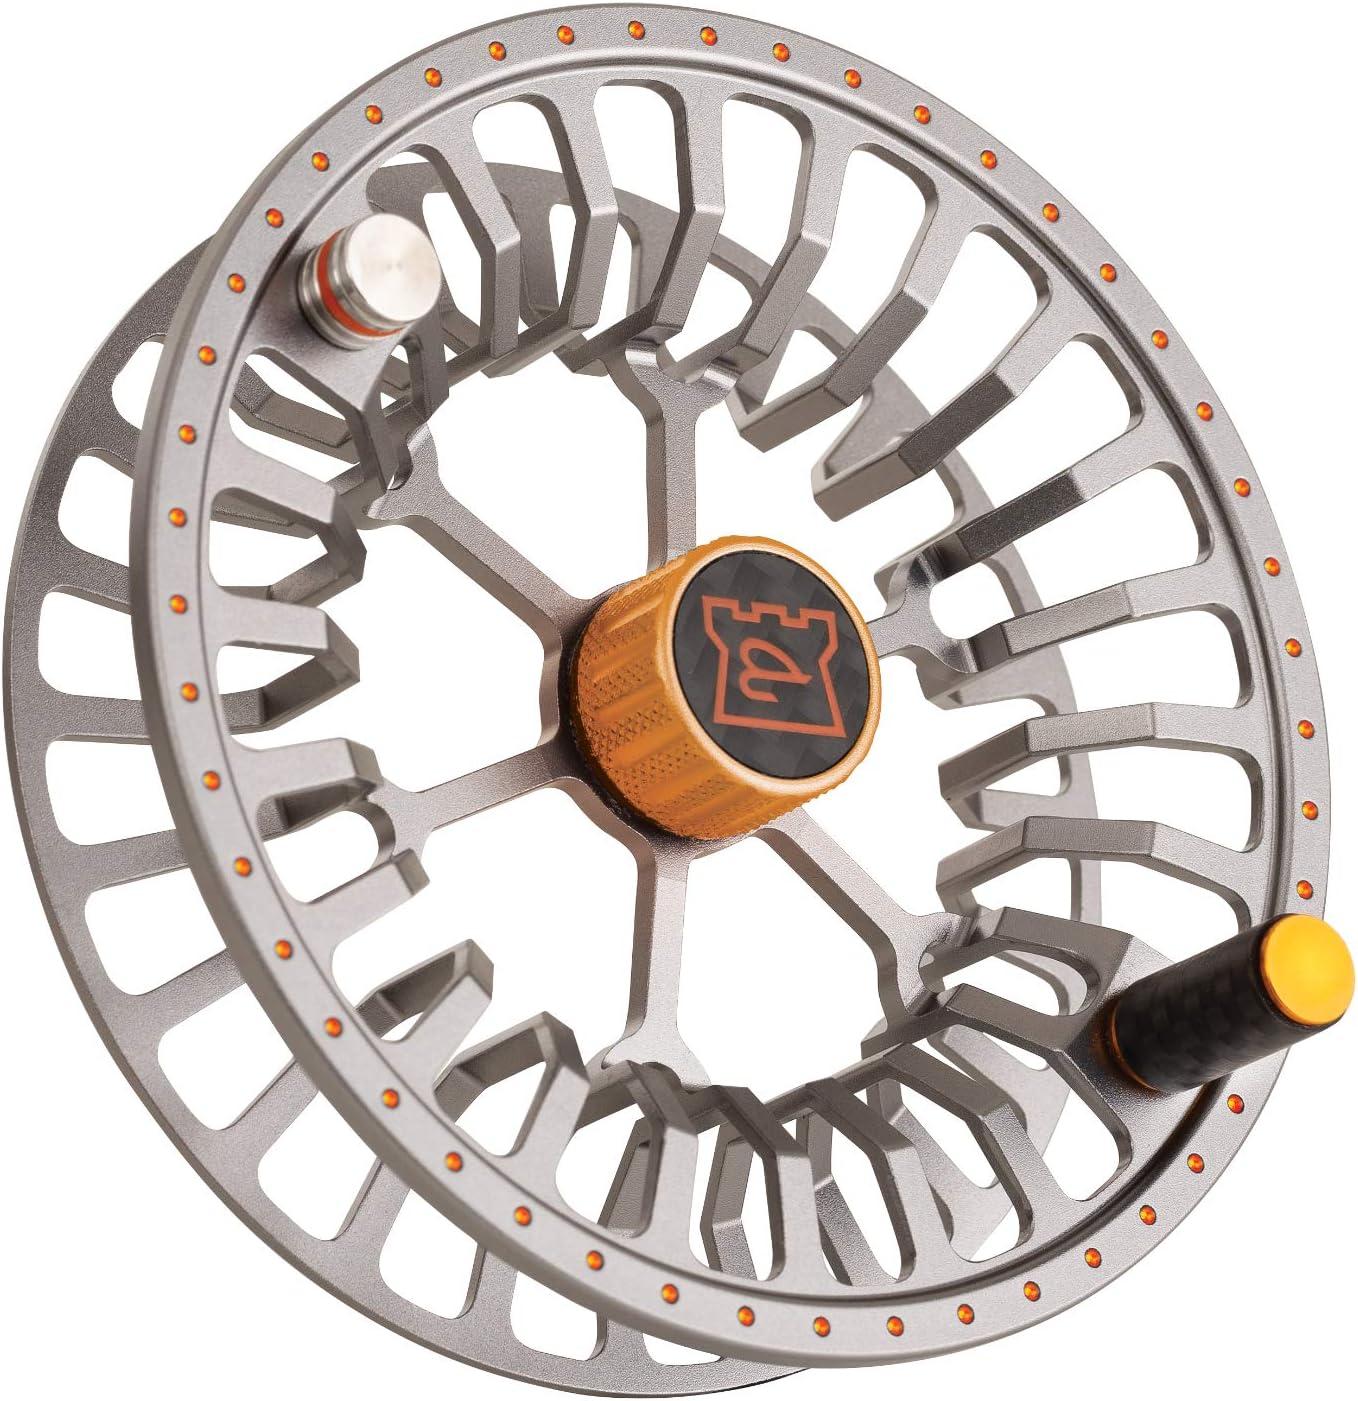 HARDY Ultralite MTX-S Fly Fishing Reel or Spare Spool - Right/Left